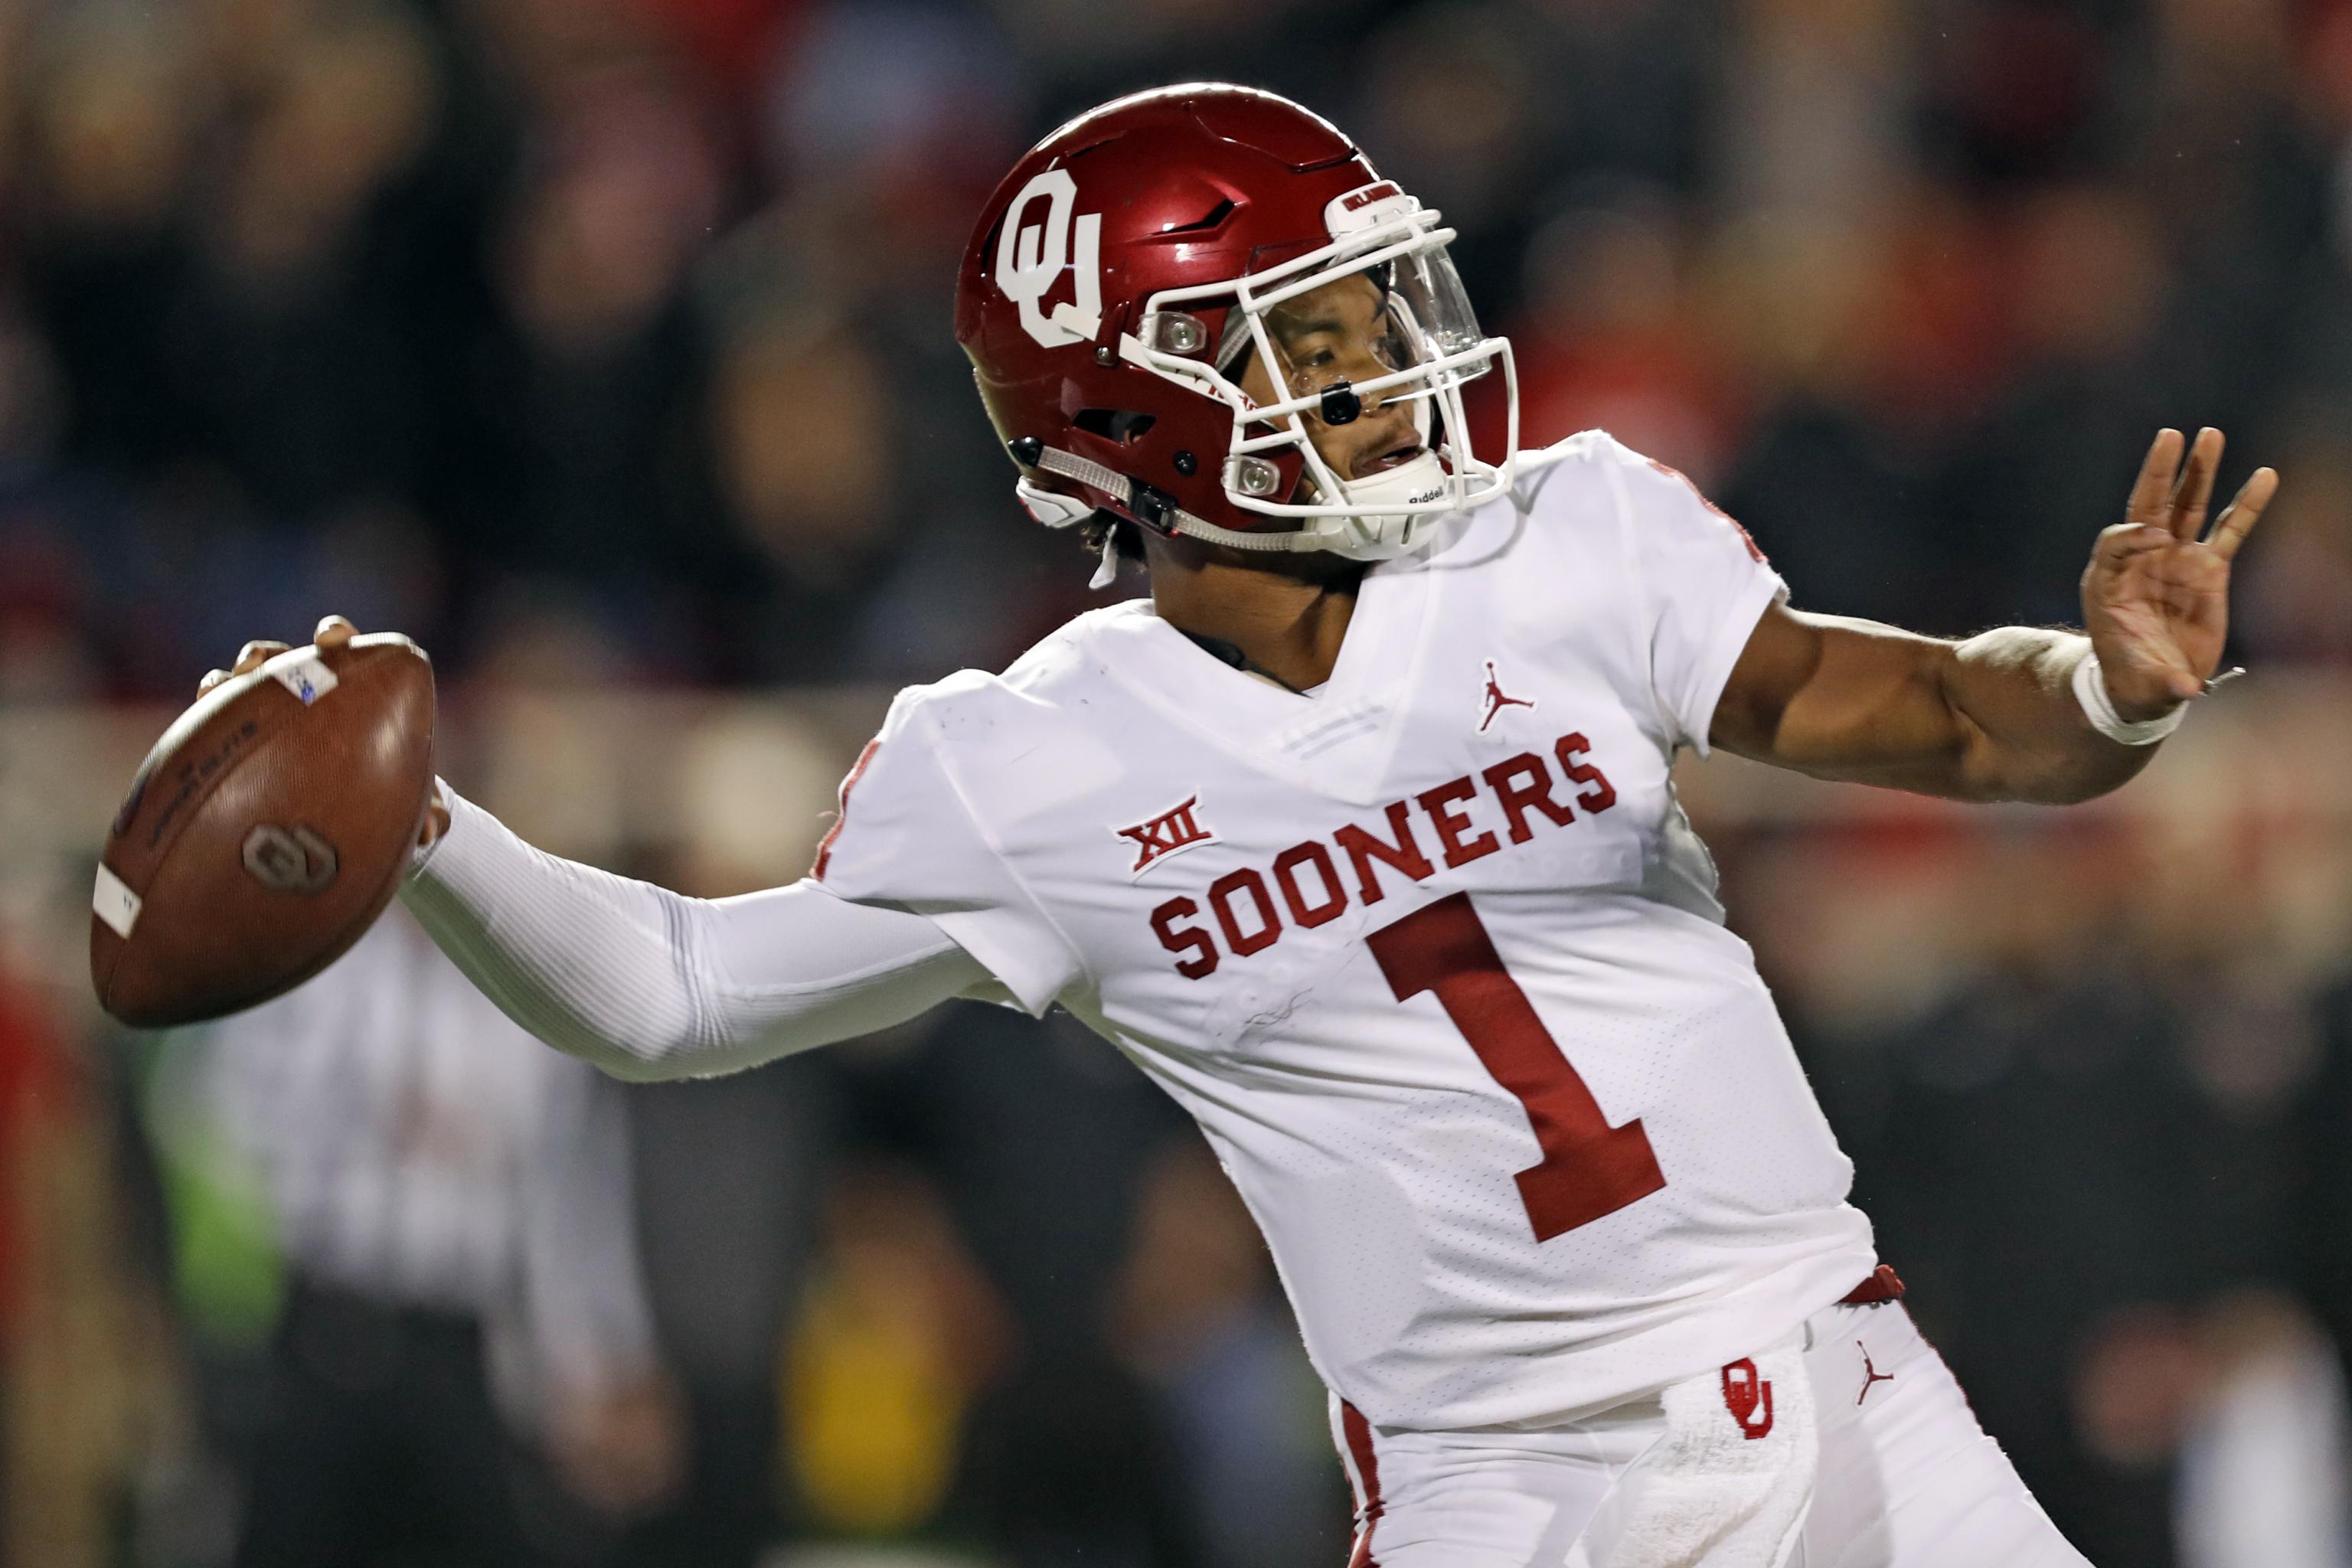 2019 NFL combine predictions: How tall is Kyler Murray?